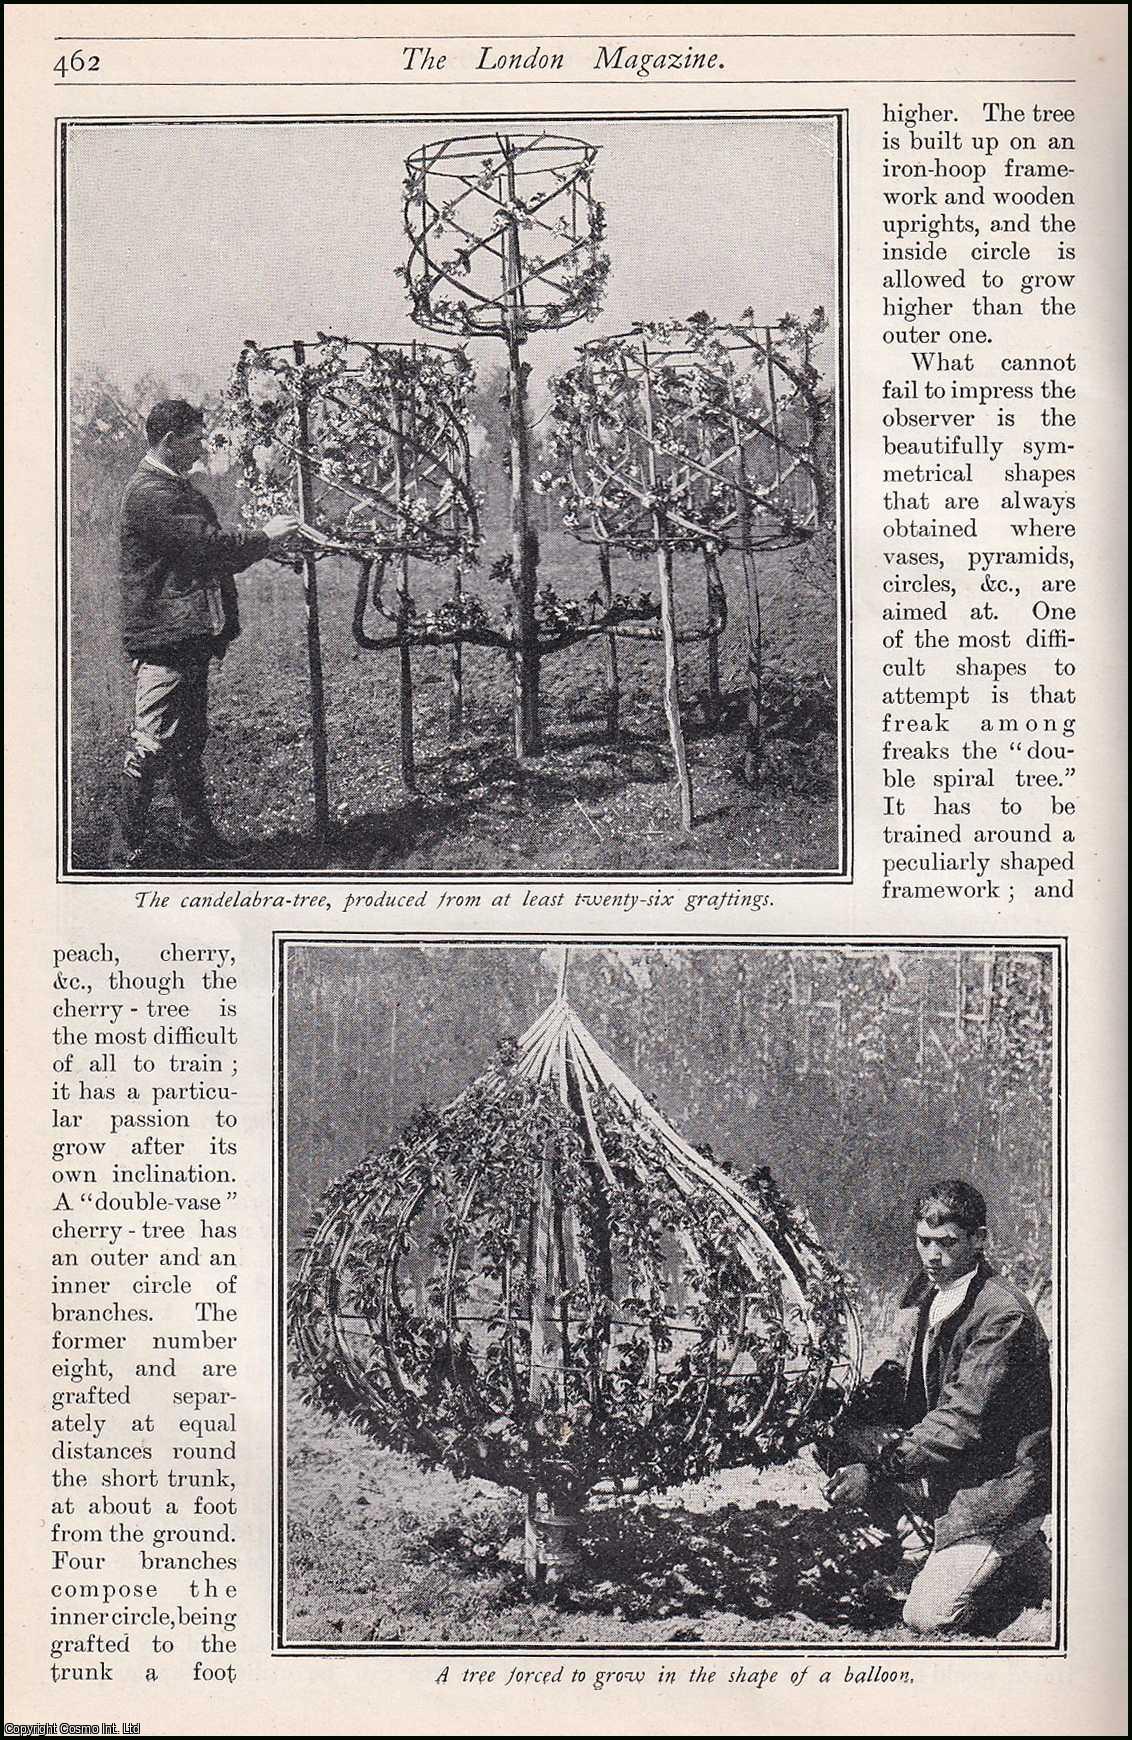 Howard C. Lessing - Topiary. A Freak-Tree Farm, Paris. An uncommon original article from the Harmsworth London Magazine, 1905.